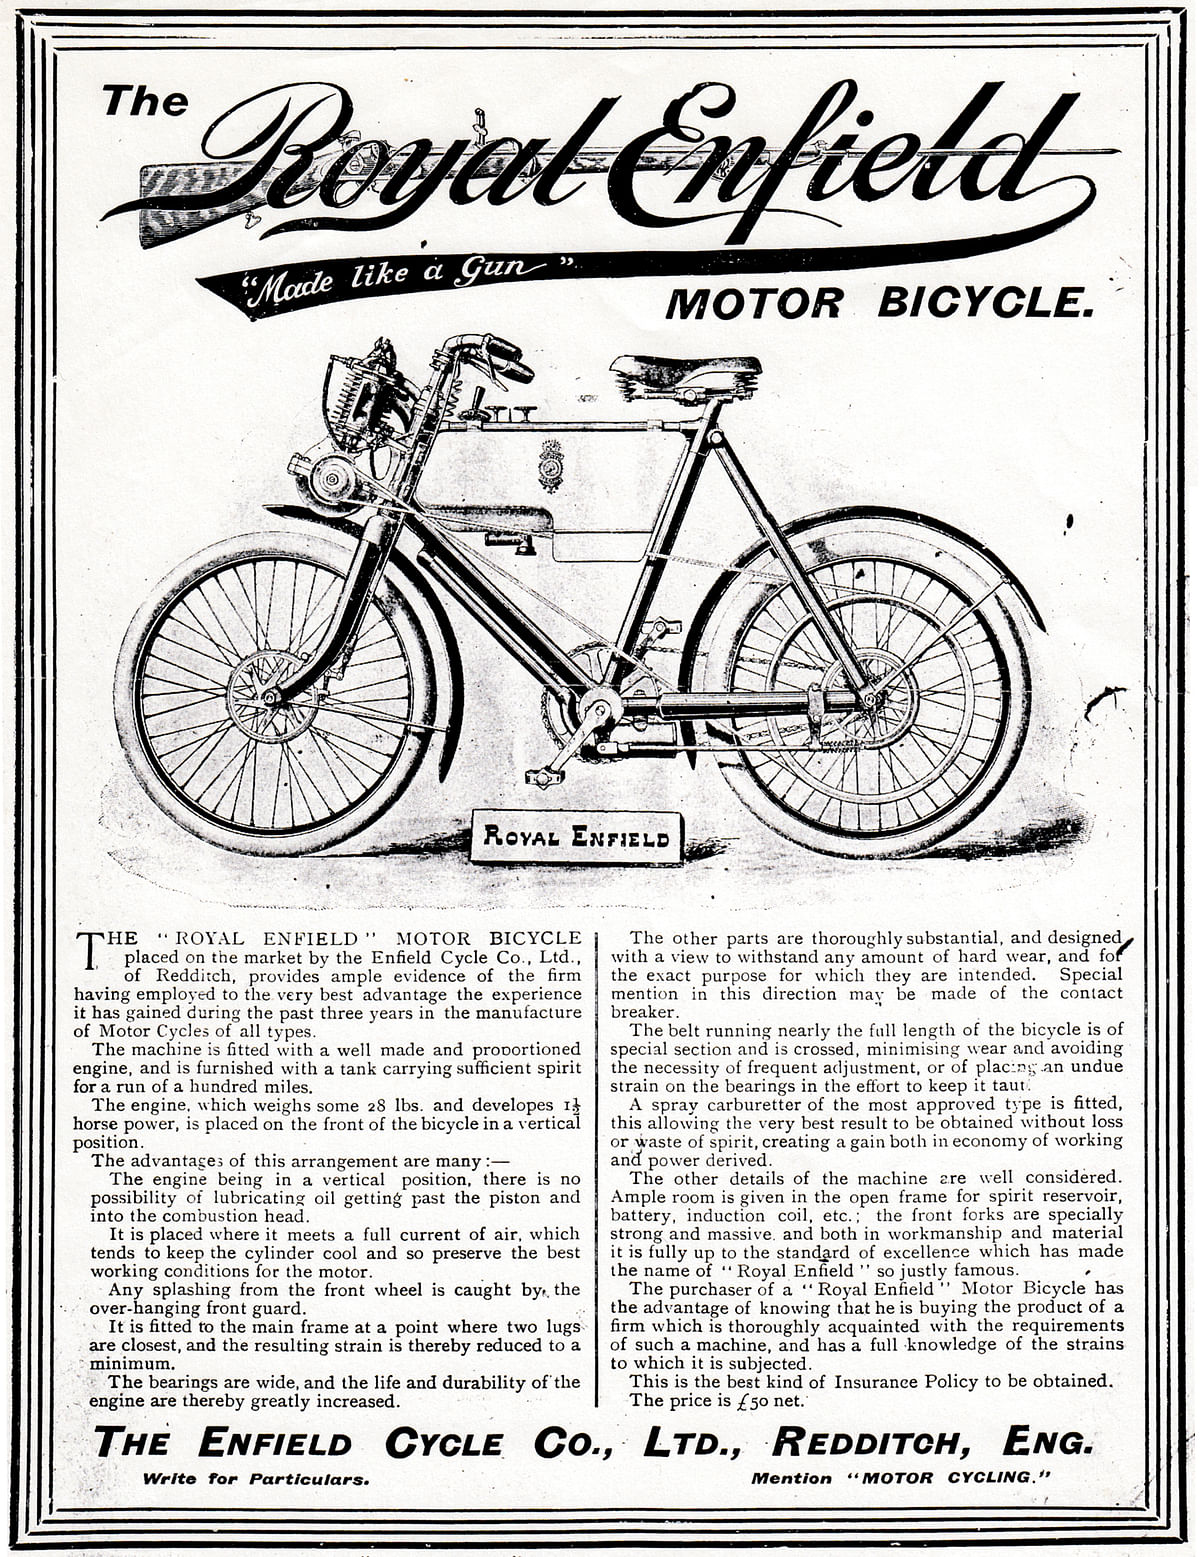 The first Royal Enfield advert